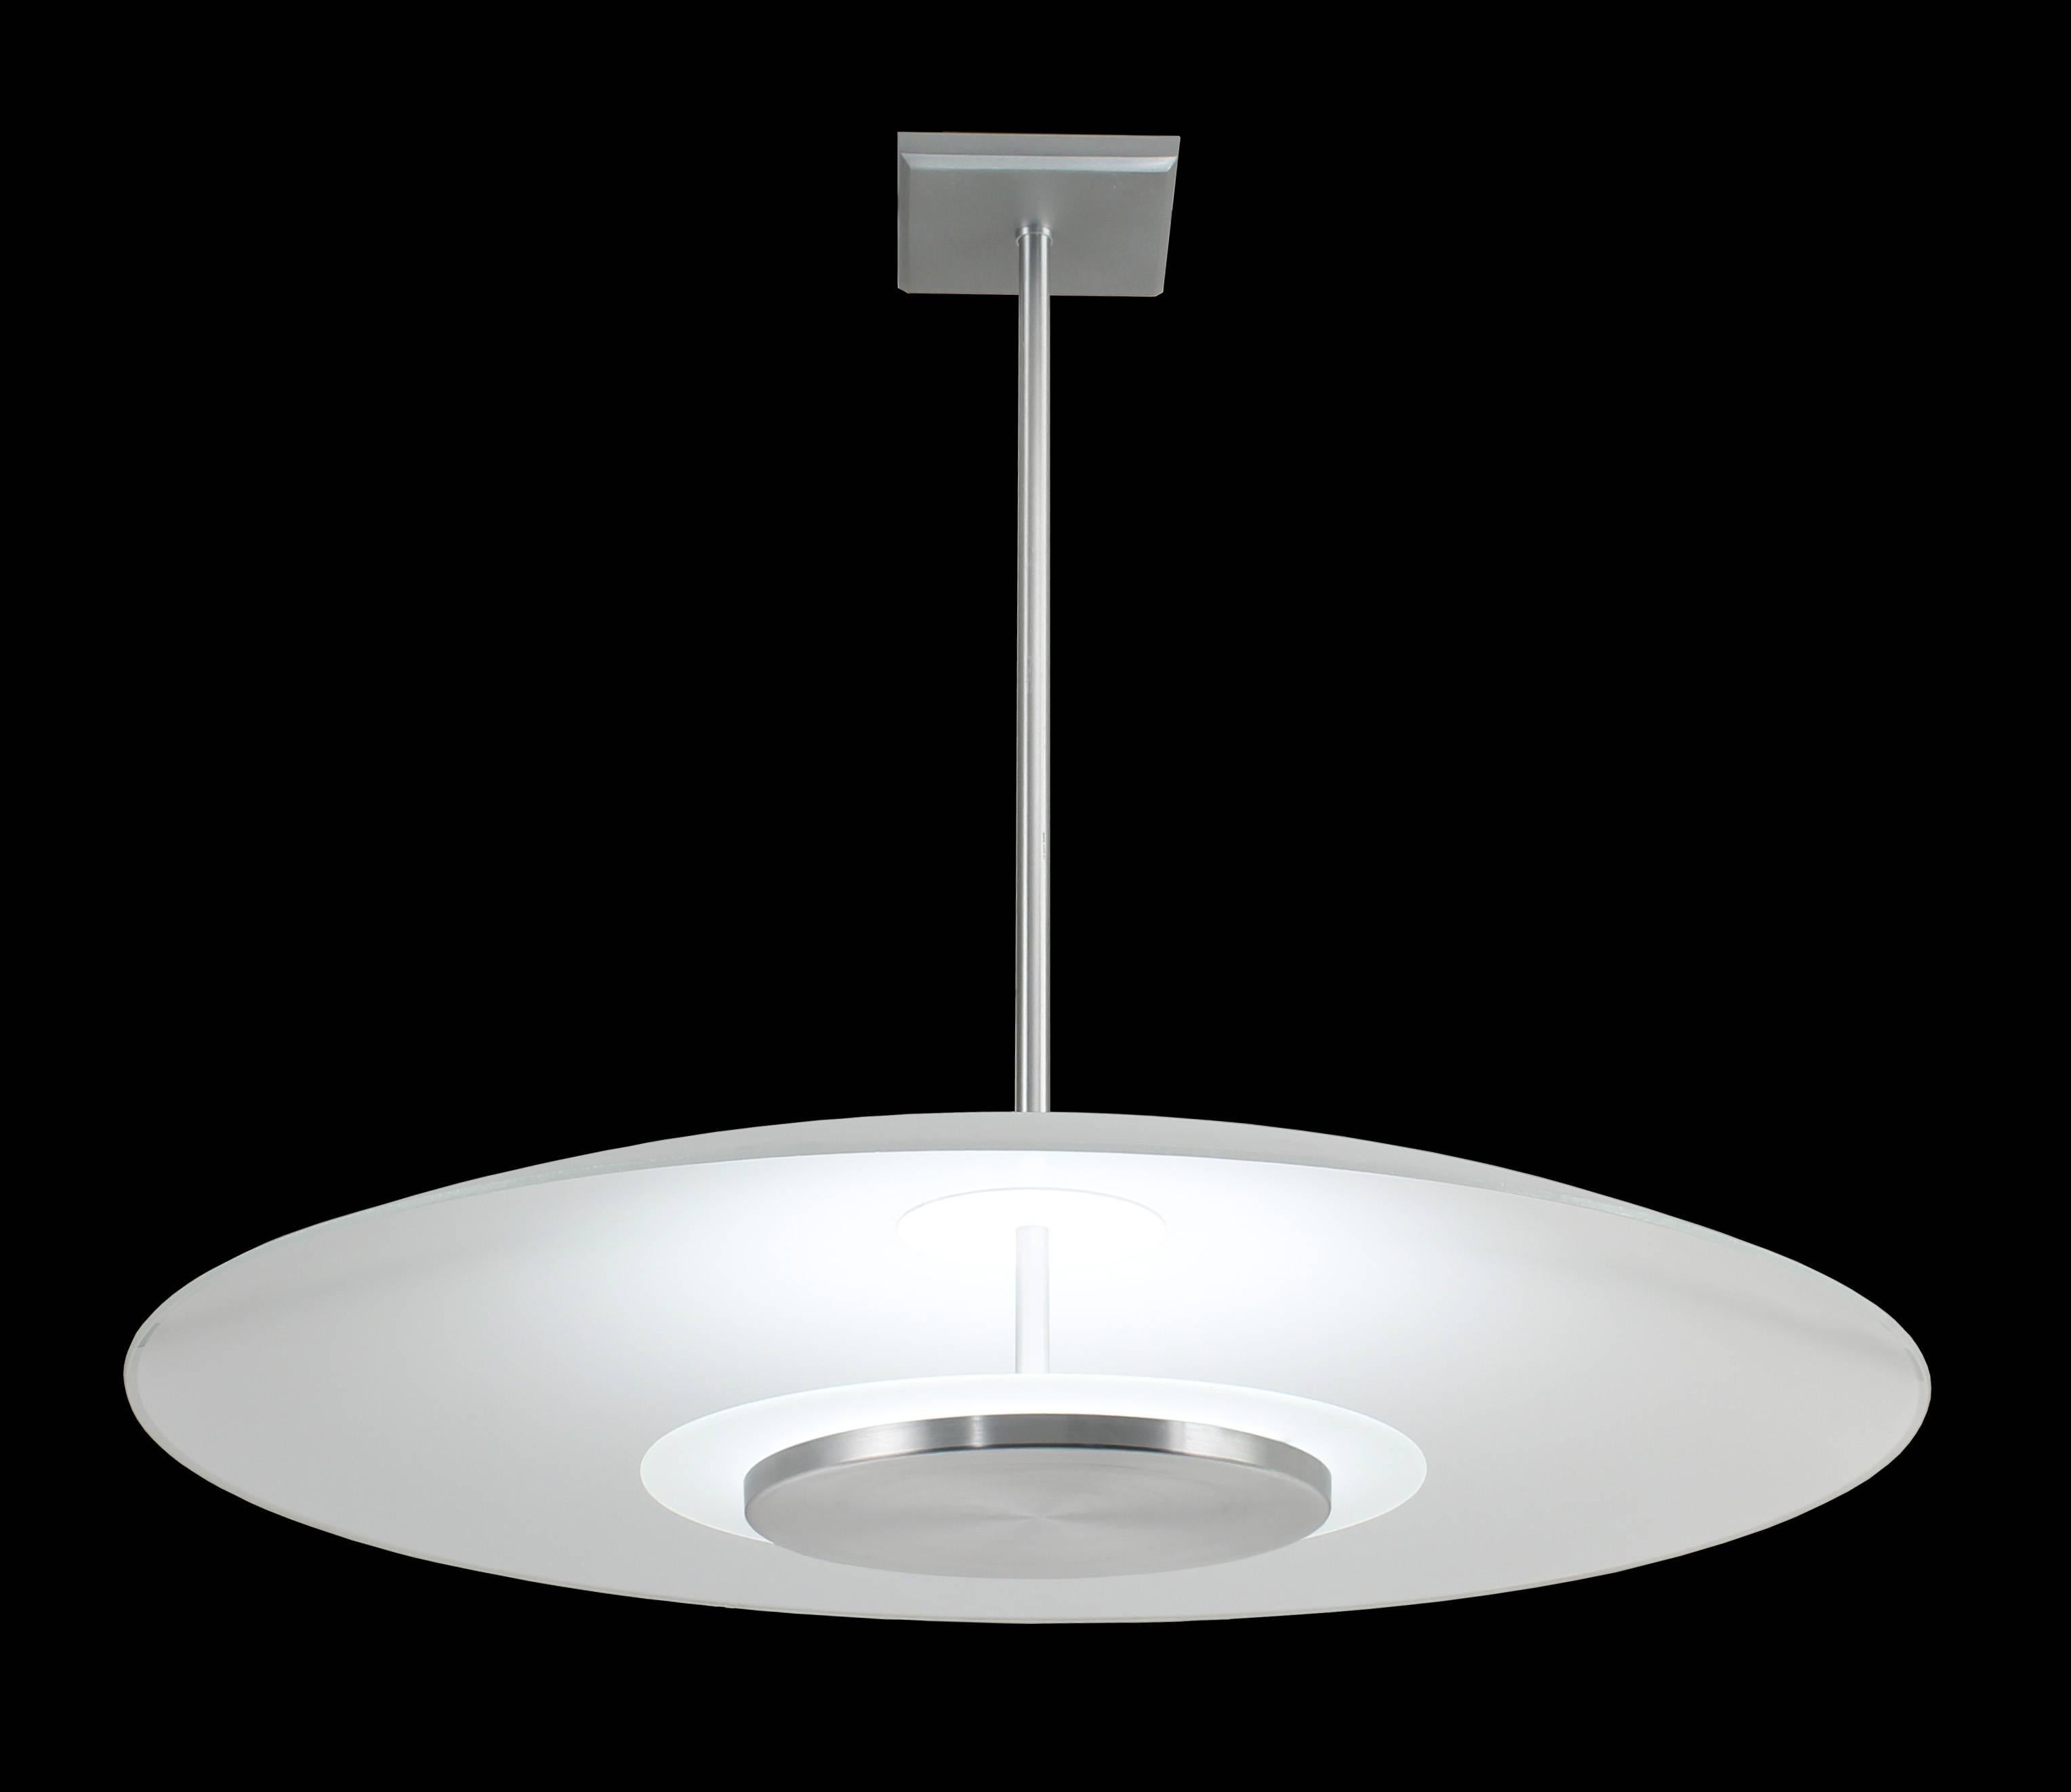 32 inch diameter reverse glass bowl pendant light. Mid-Century Modern style. Top glass bowl acts as a reflector for the lower spread lens. Fixture provides reflected light downward and a soft light to the ceiling above through the top glass. LED